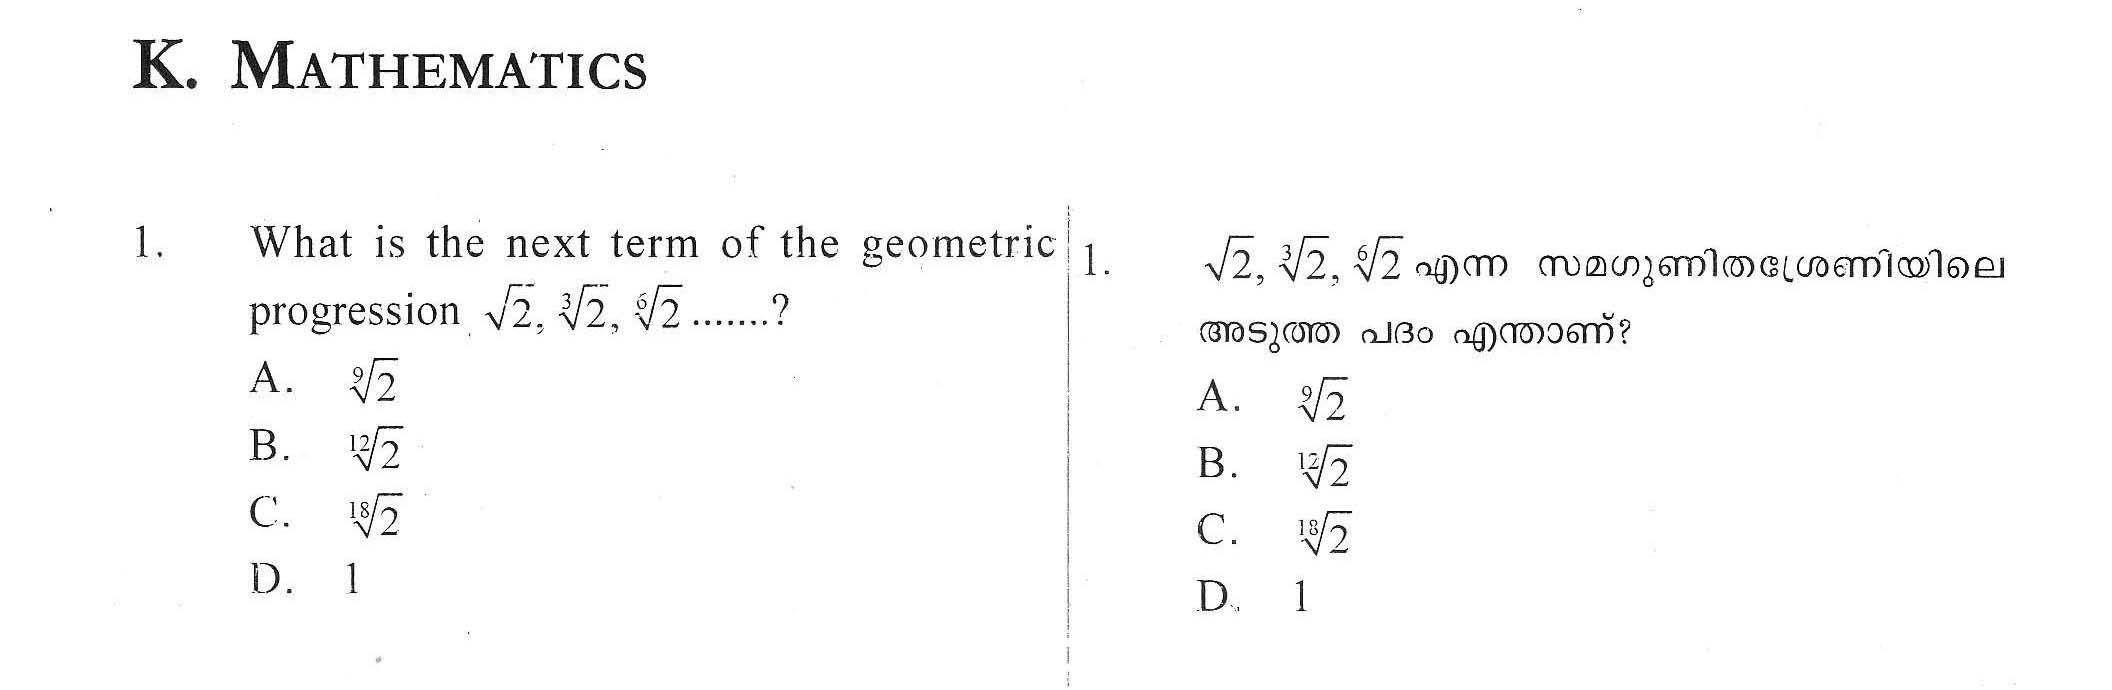 KTET Category III Paper III Mathematics Question Paper with Answers 2012 1